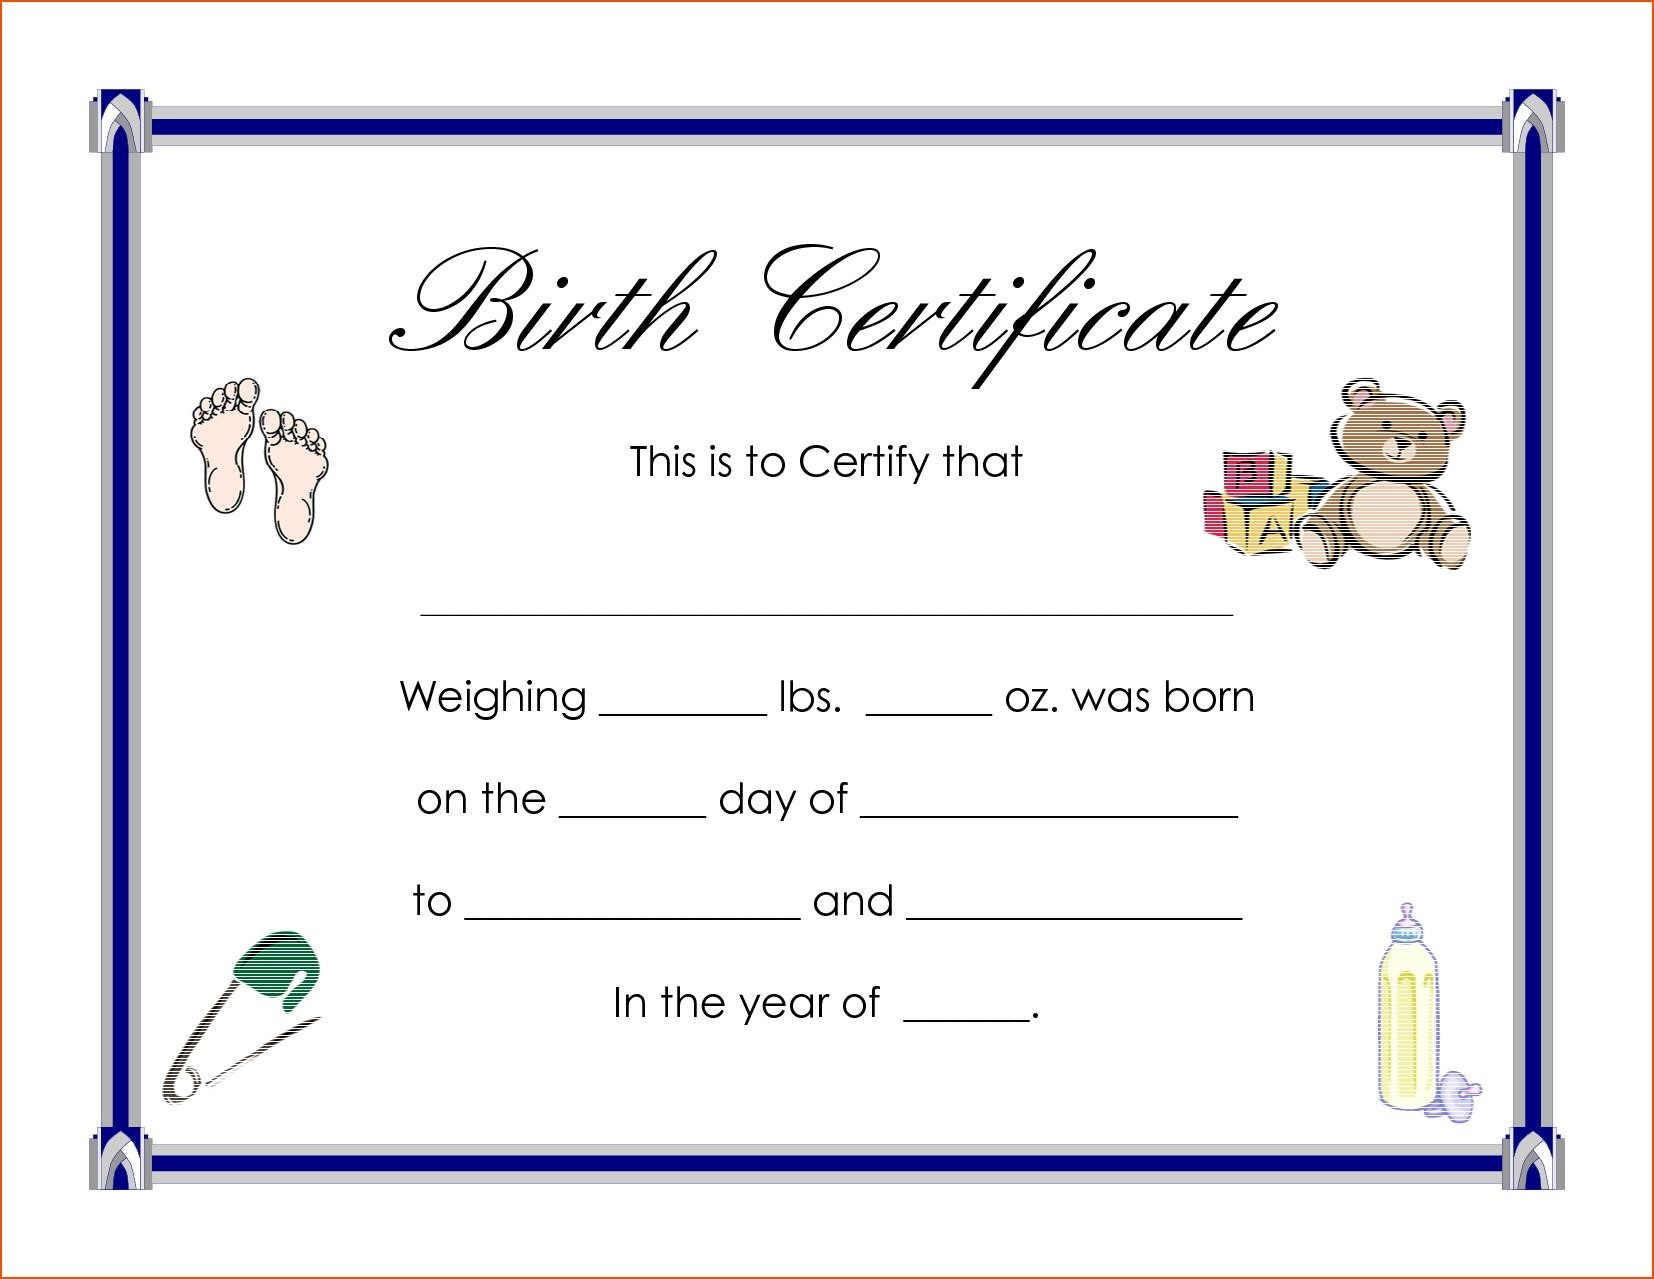 Certificates: Enchanting Birth Certificate Templates Designs Throughout Fake Birth Certificate Template